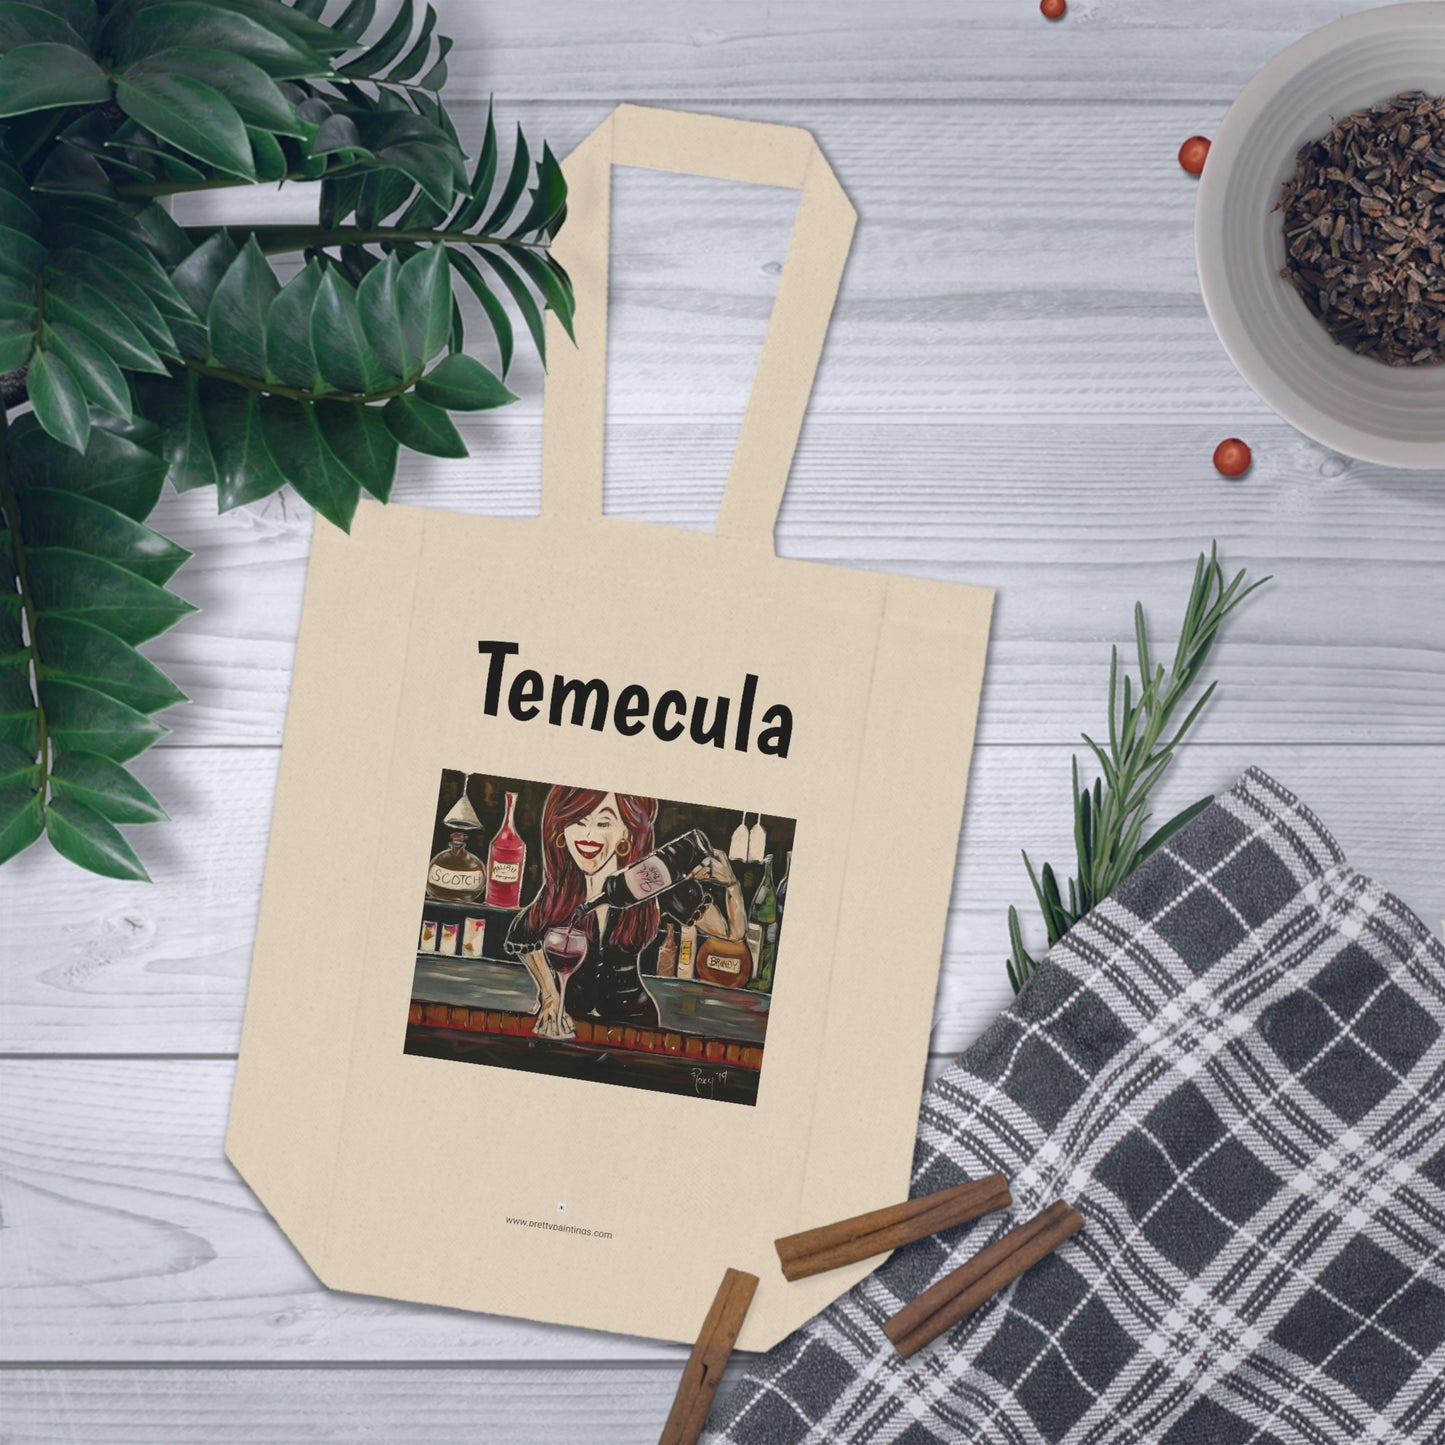 Temecula Double Wine Tote Bag featuring "Sassy Notes" painting